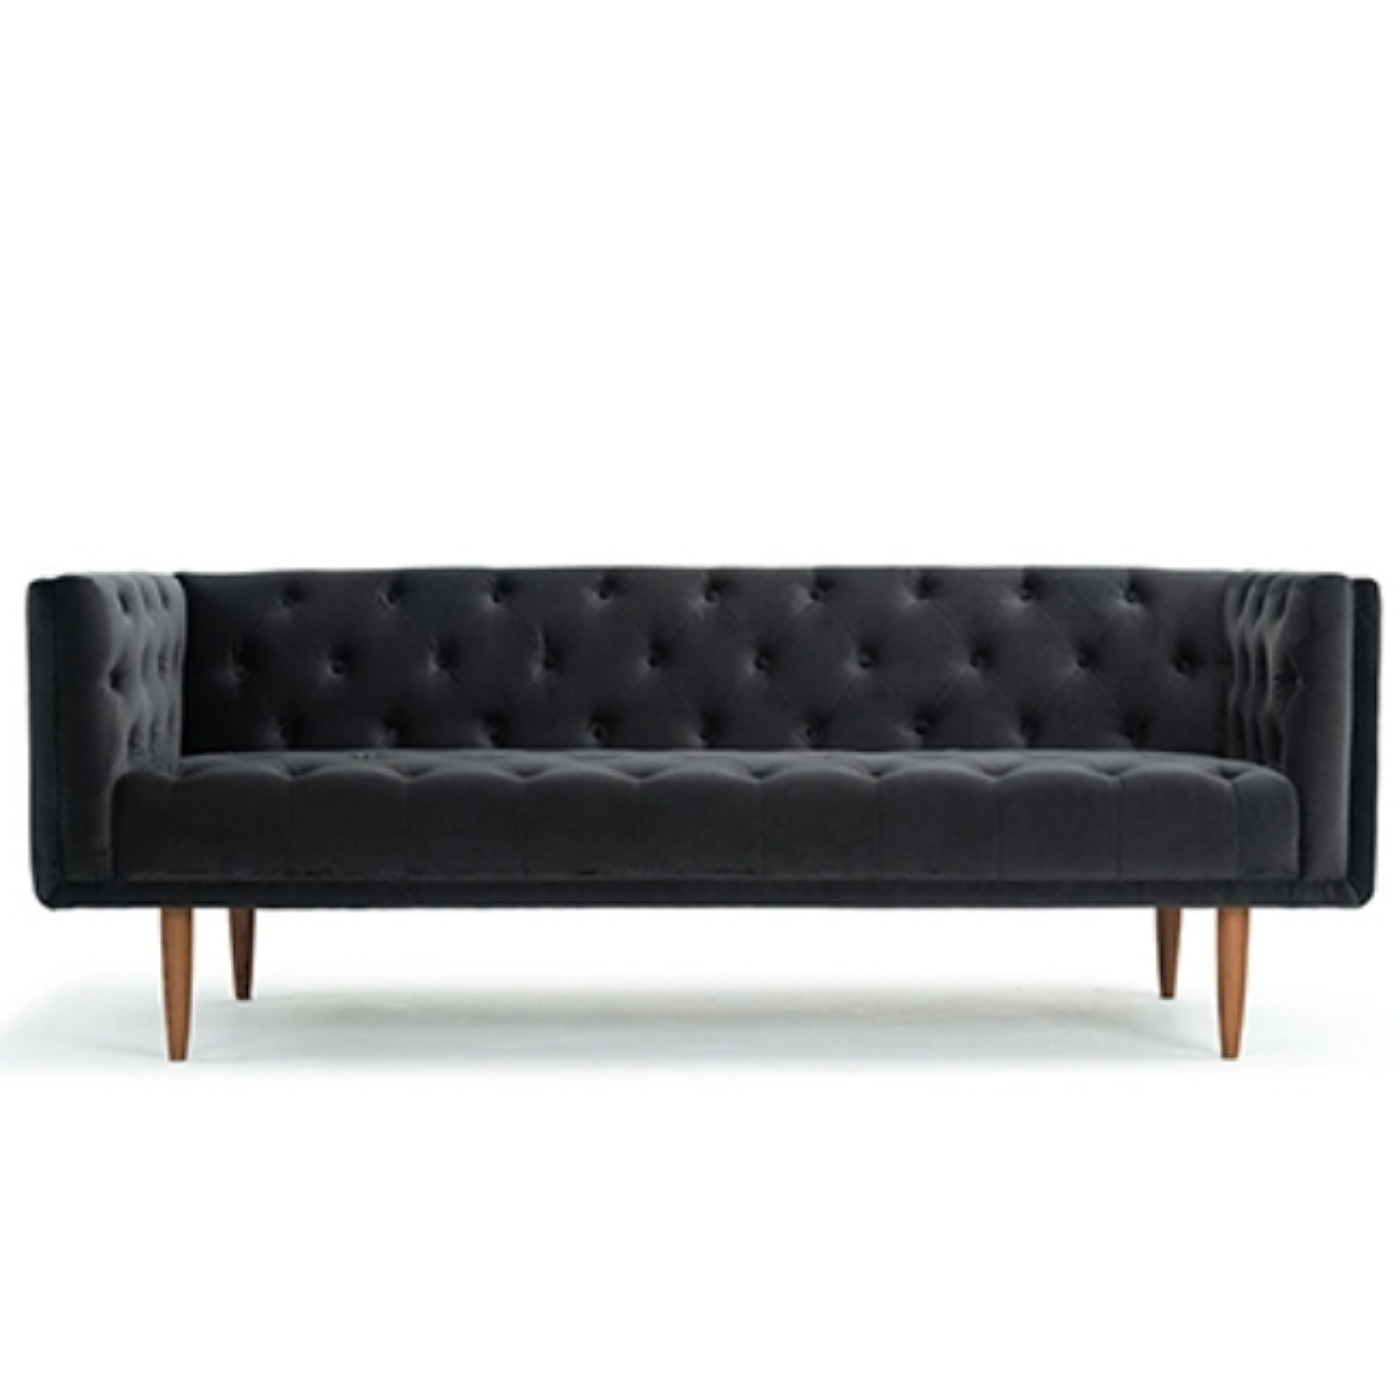 Three Seat Couch With Dark Suede Fabric And .Dark Wooden Legs